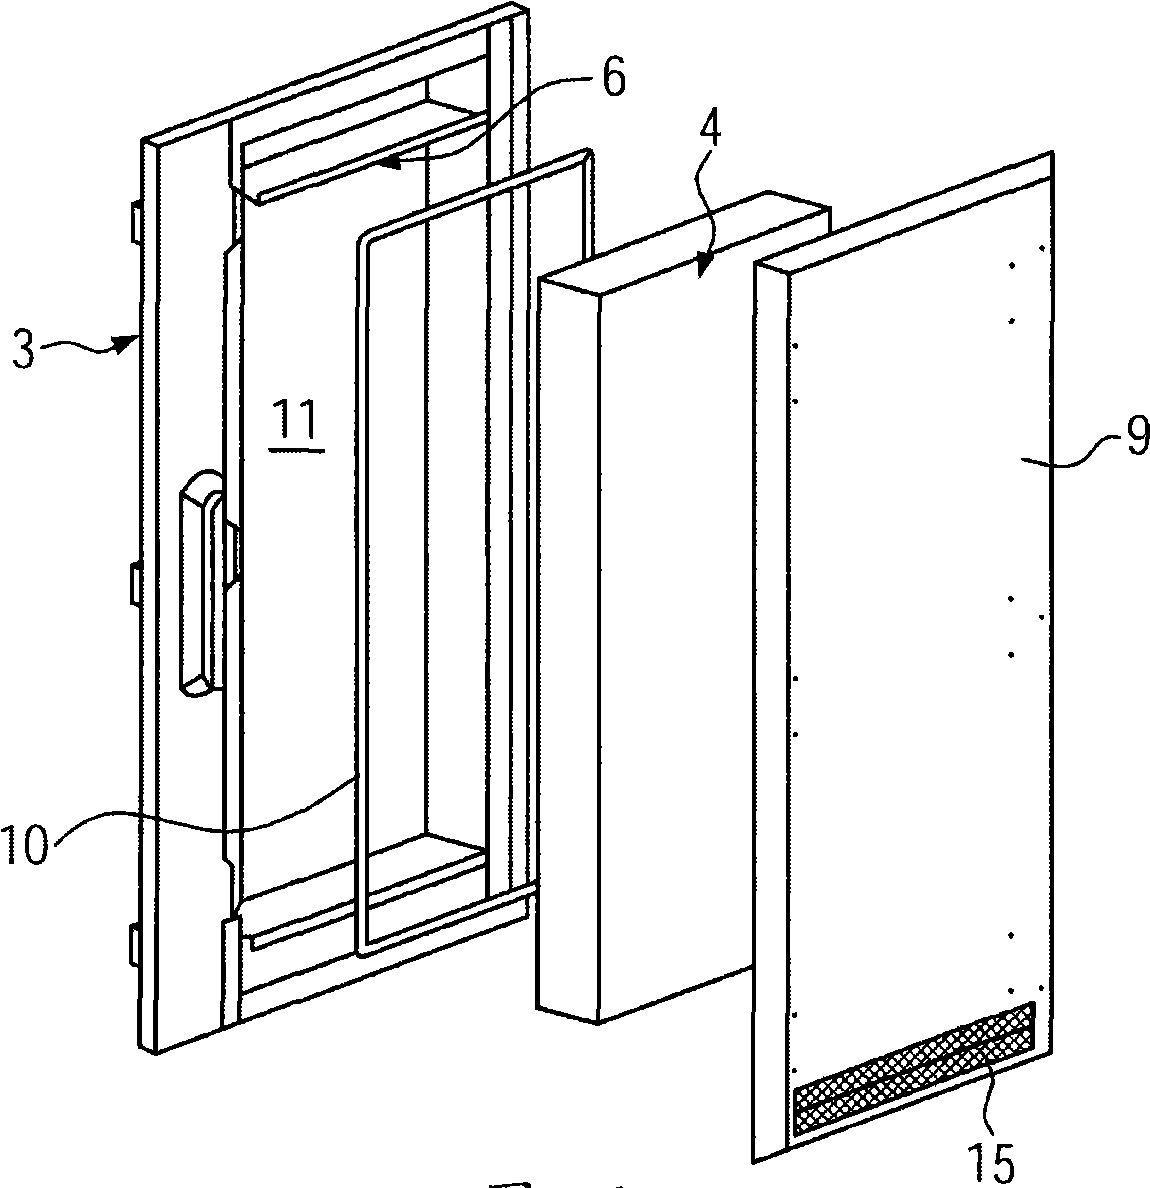 System for cooling electrical components and devices